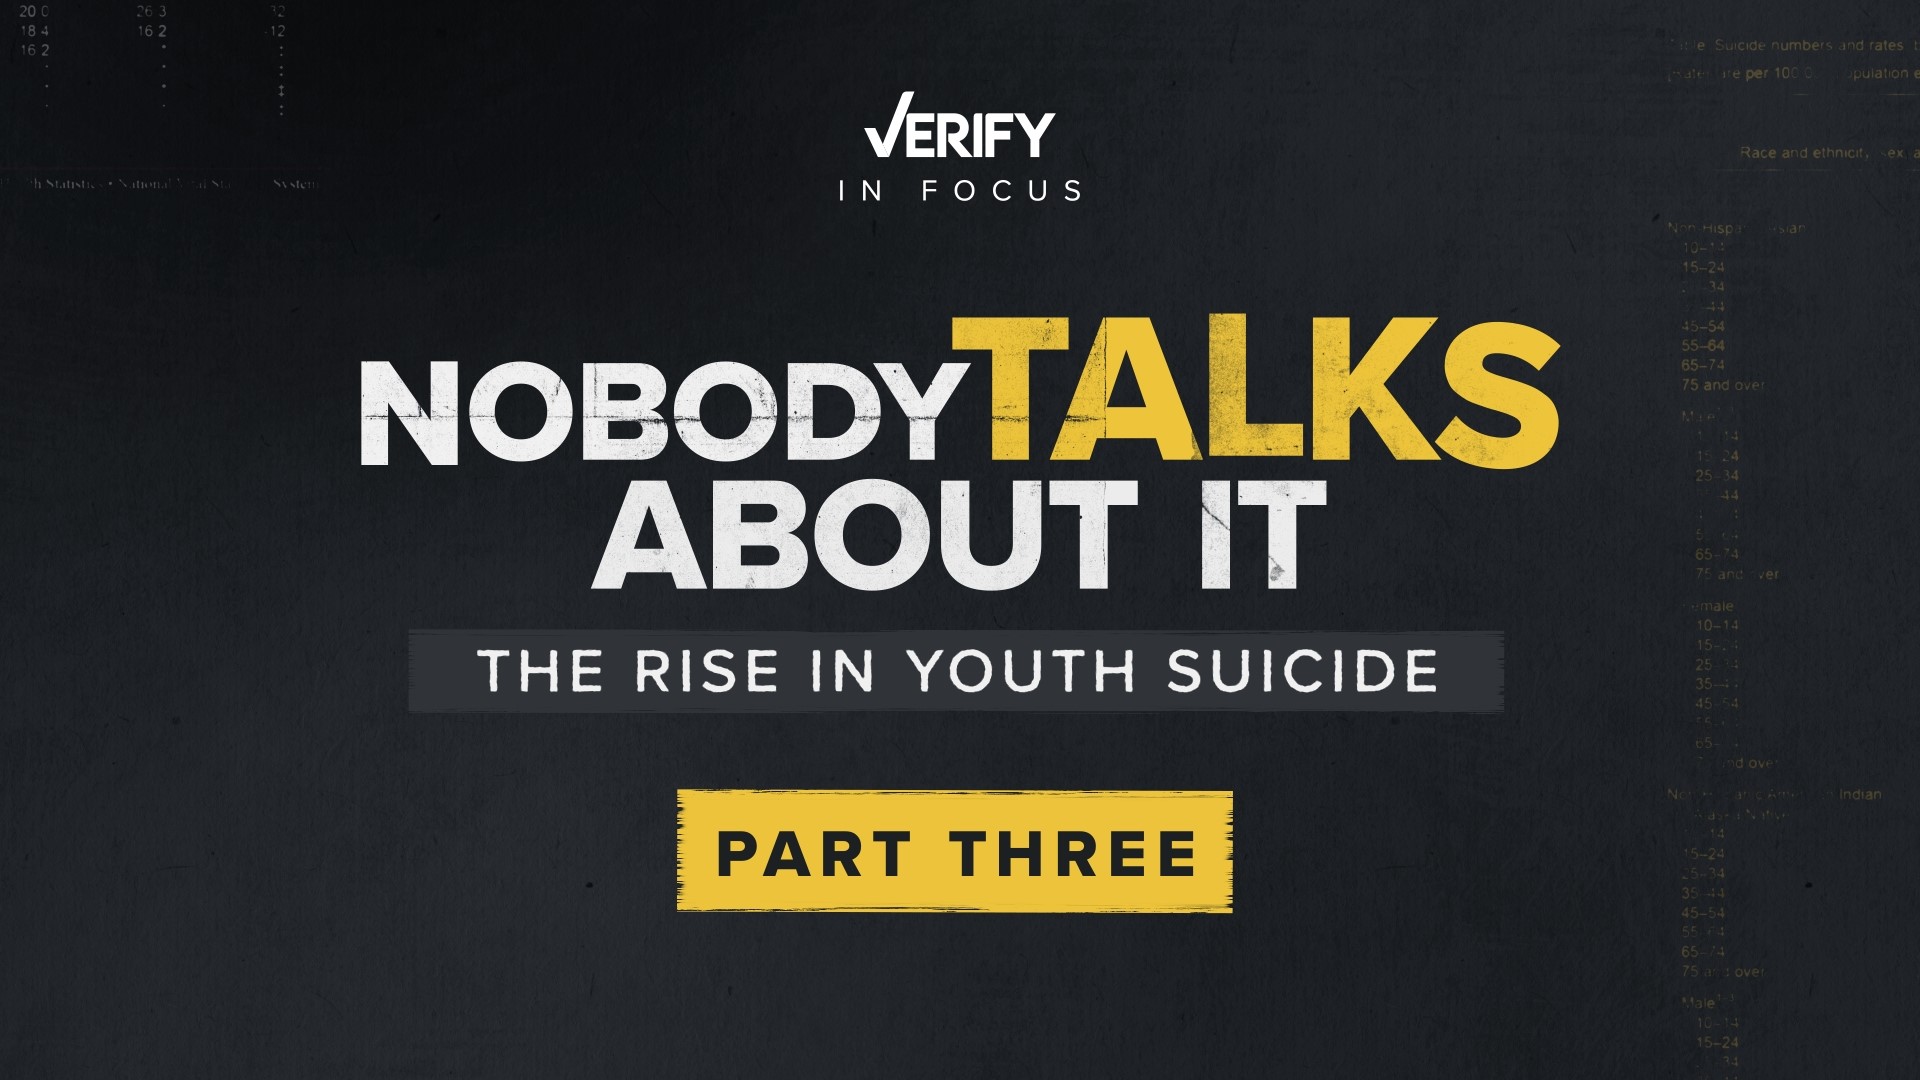 In part three, we look at the impact increased social media use has on youth mental health. Our experts also share tips on how to talk to kids about suicide.